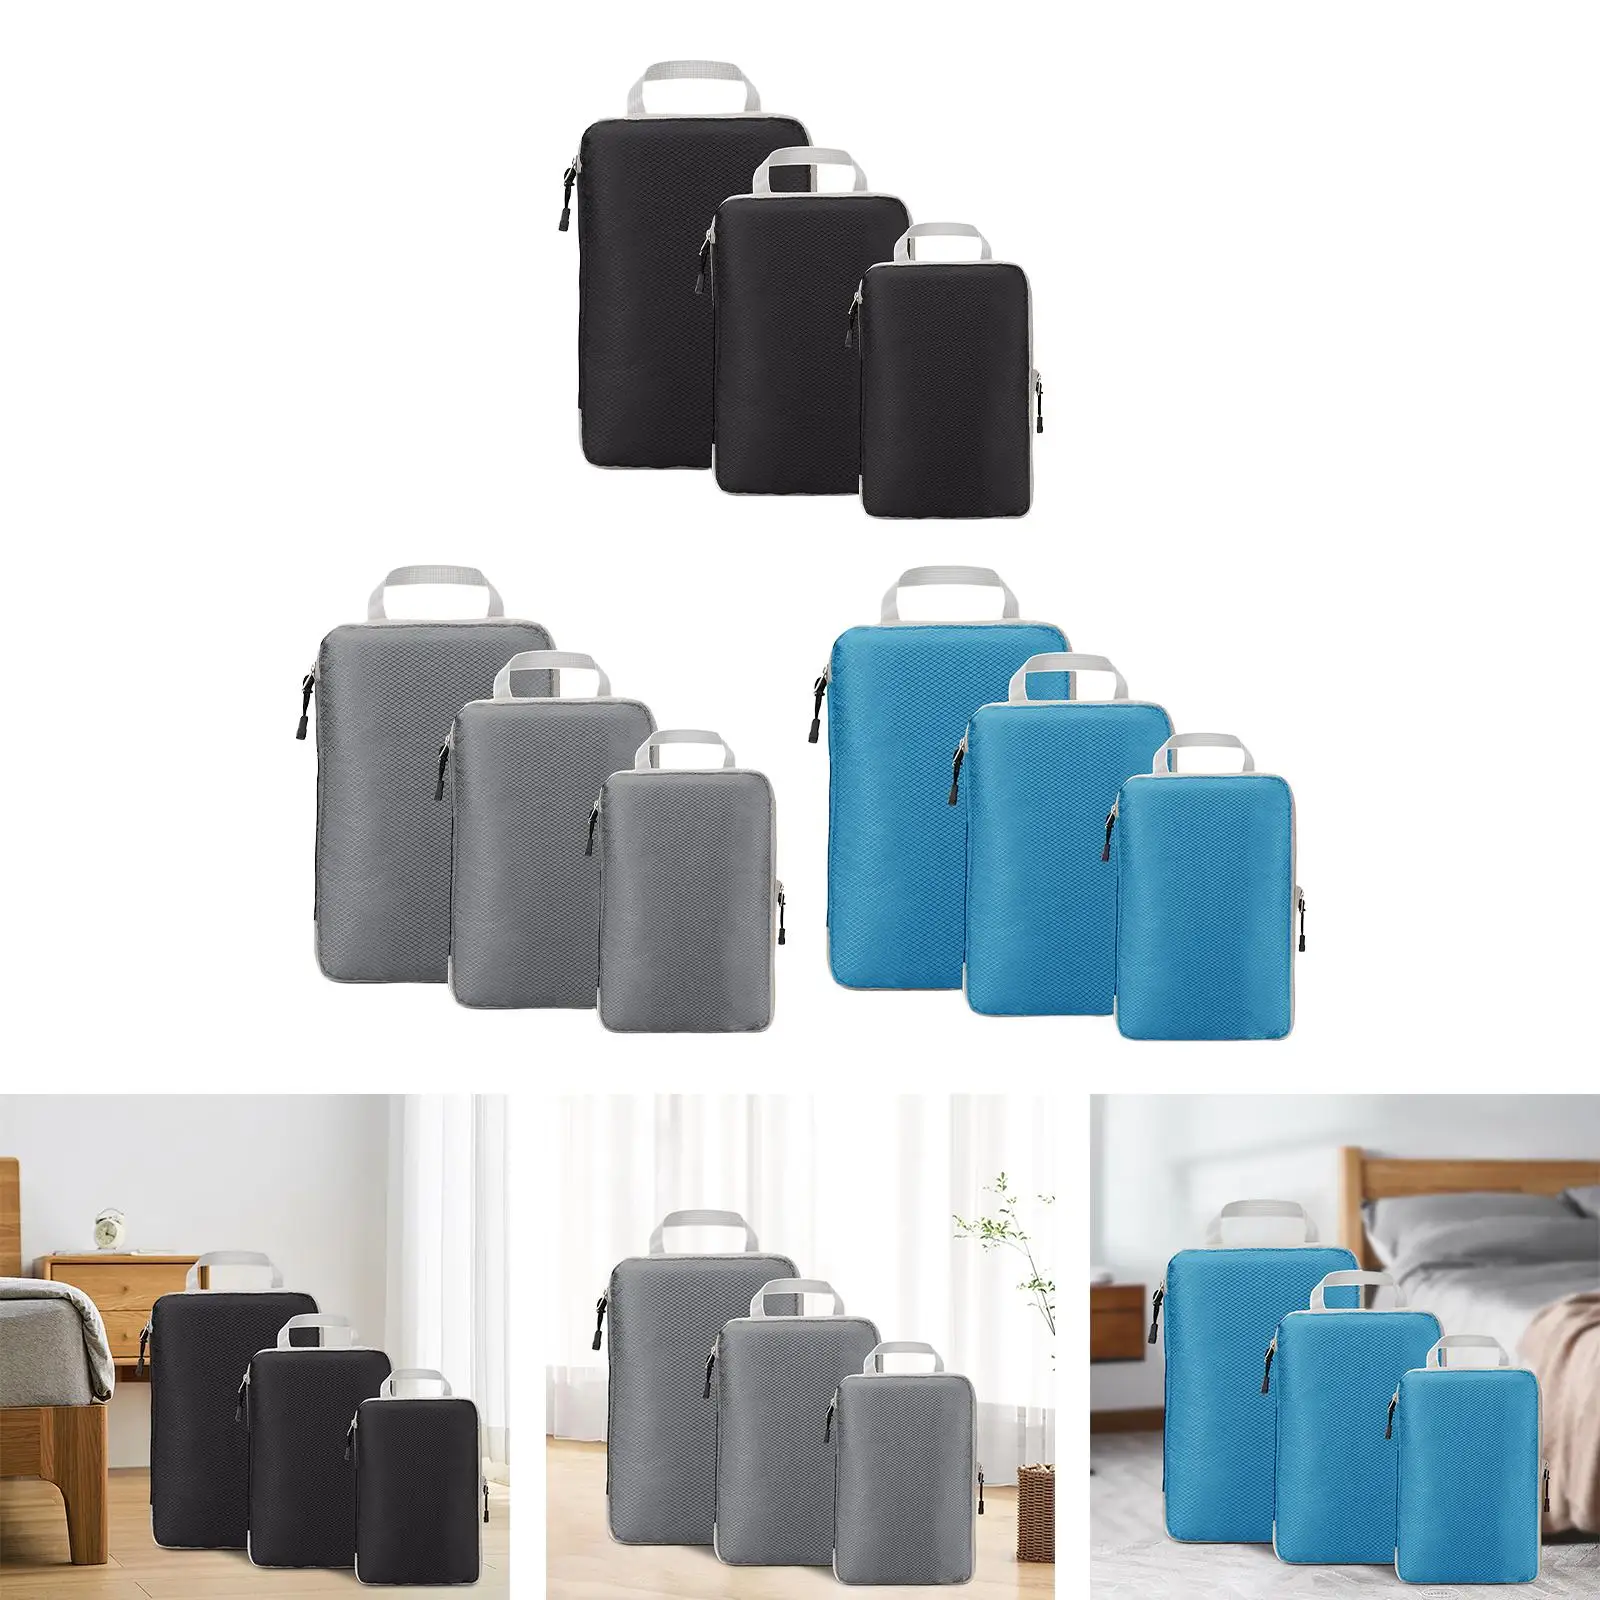 3Pcs Travel Compressible Packing Cubes Bags with Handbag Portable Luggage Organizers for Clothes Accessories Suitcases